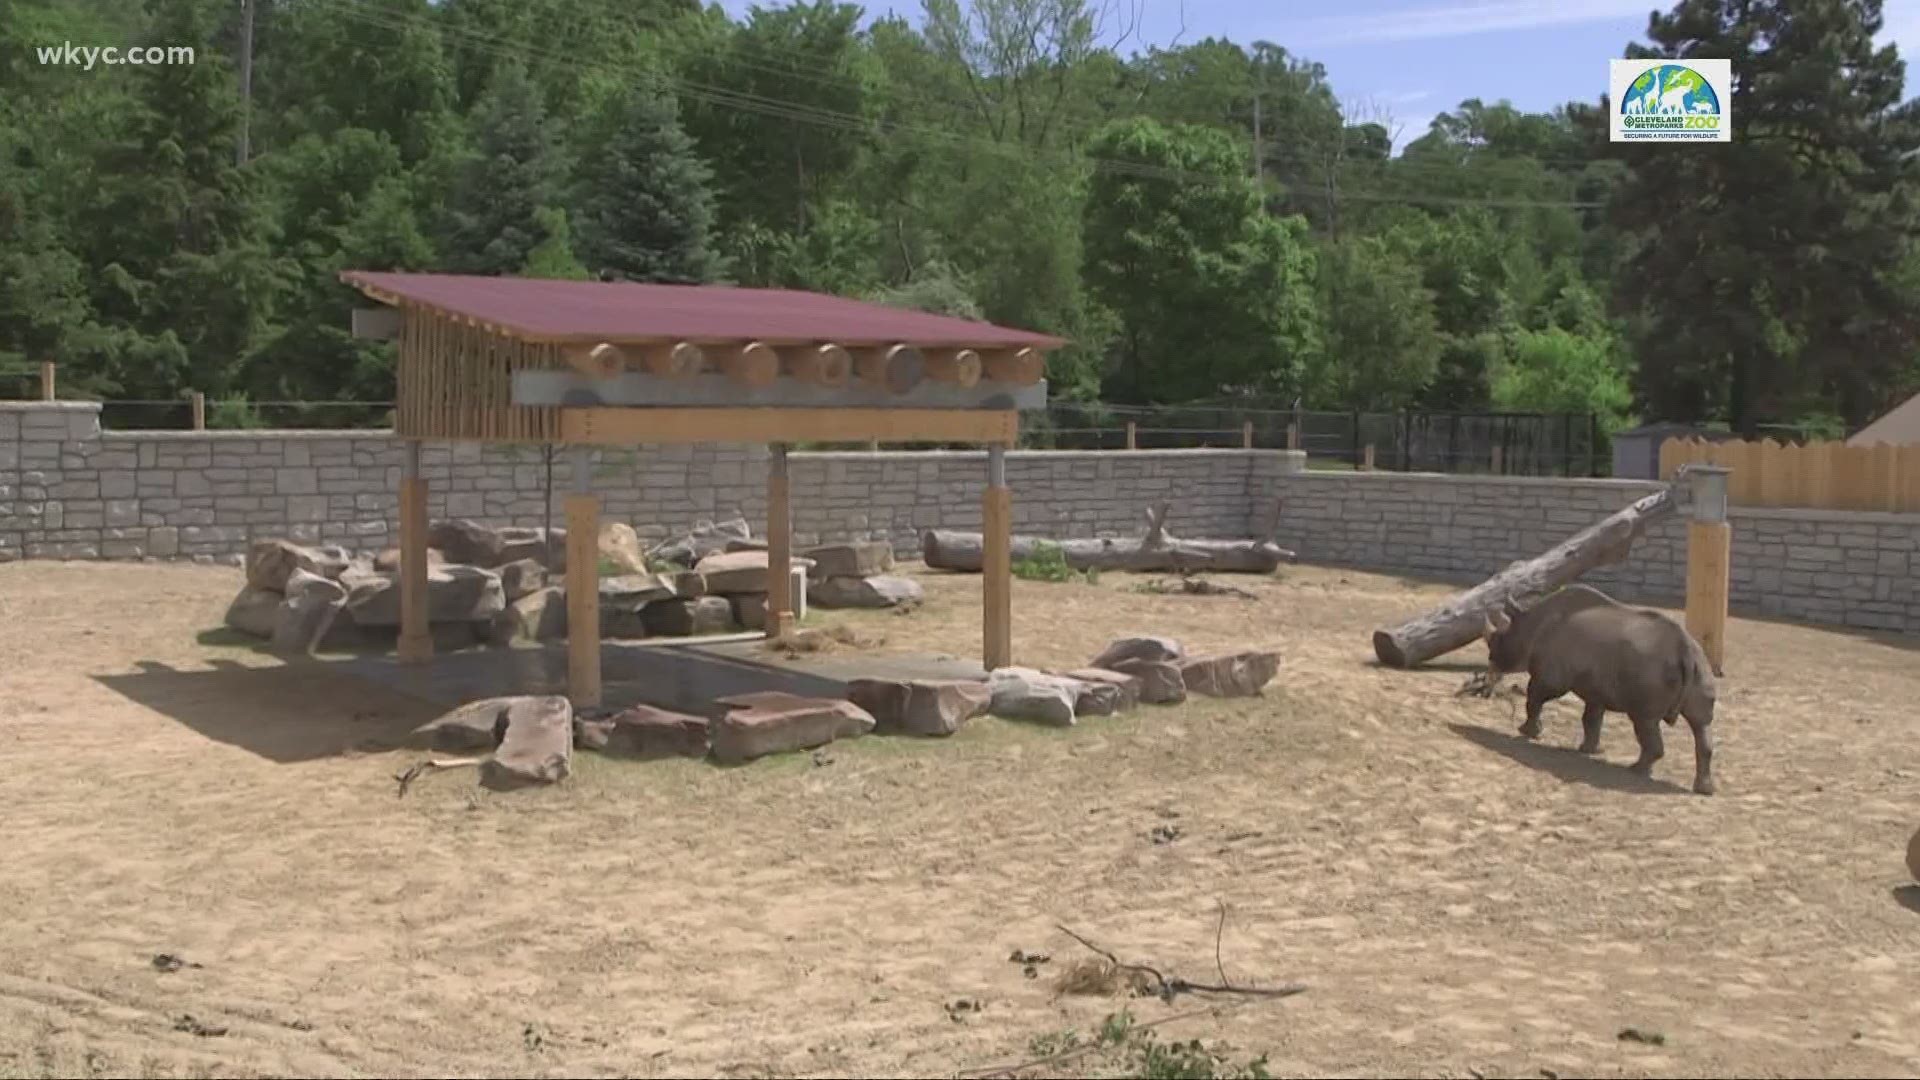 The Cleveland Zoo is reopening for the first time in months, but there are new safety precautions in place that you need to know.